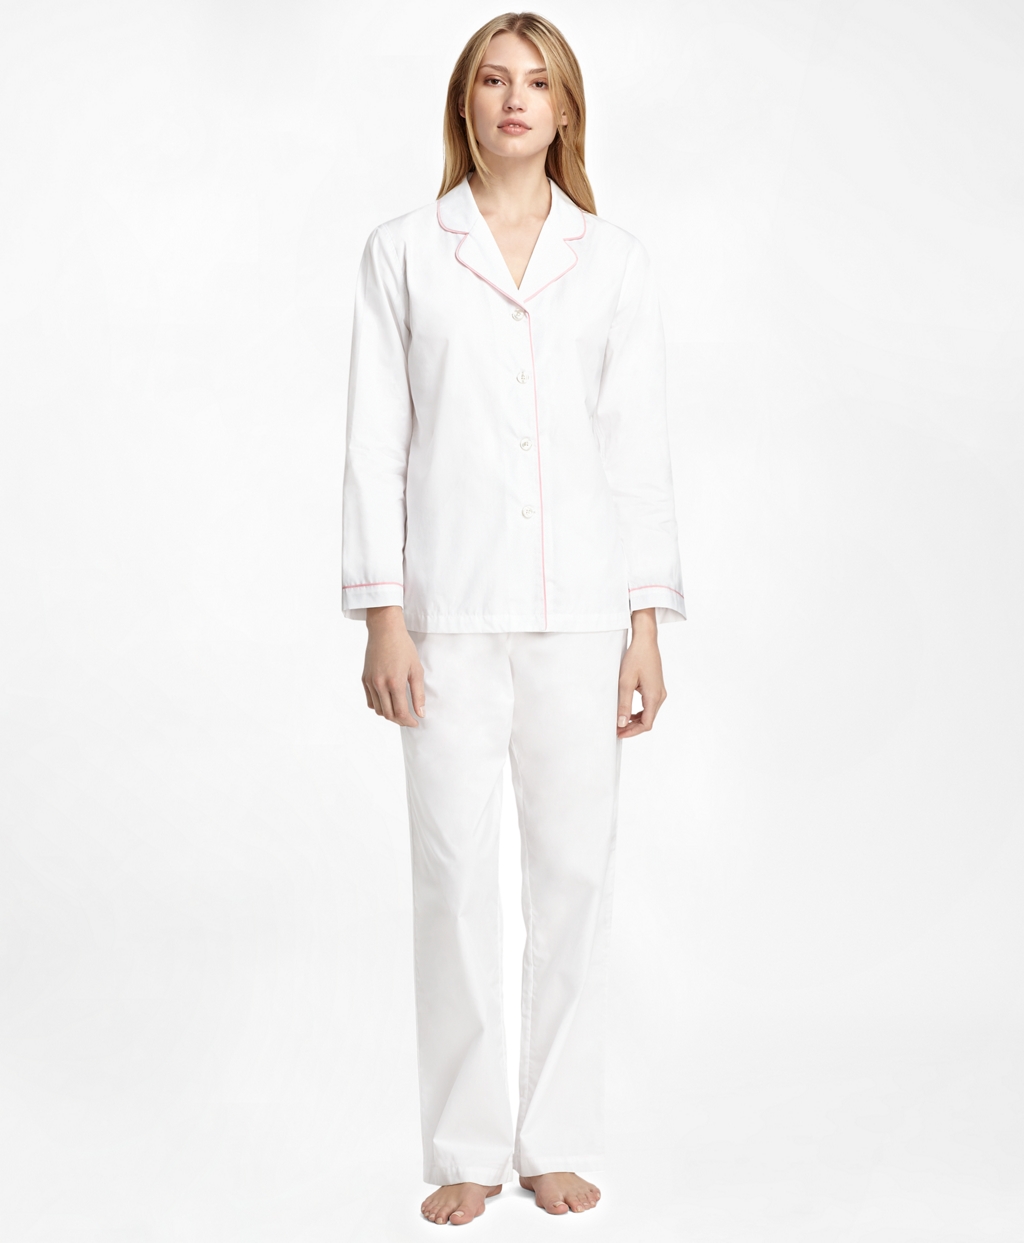 Women's White Pajamas with Pink Piping | Brooks Brothers